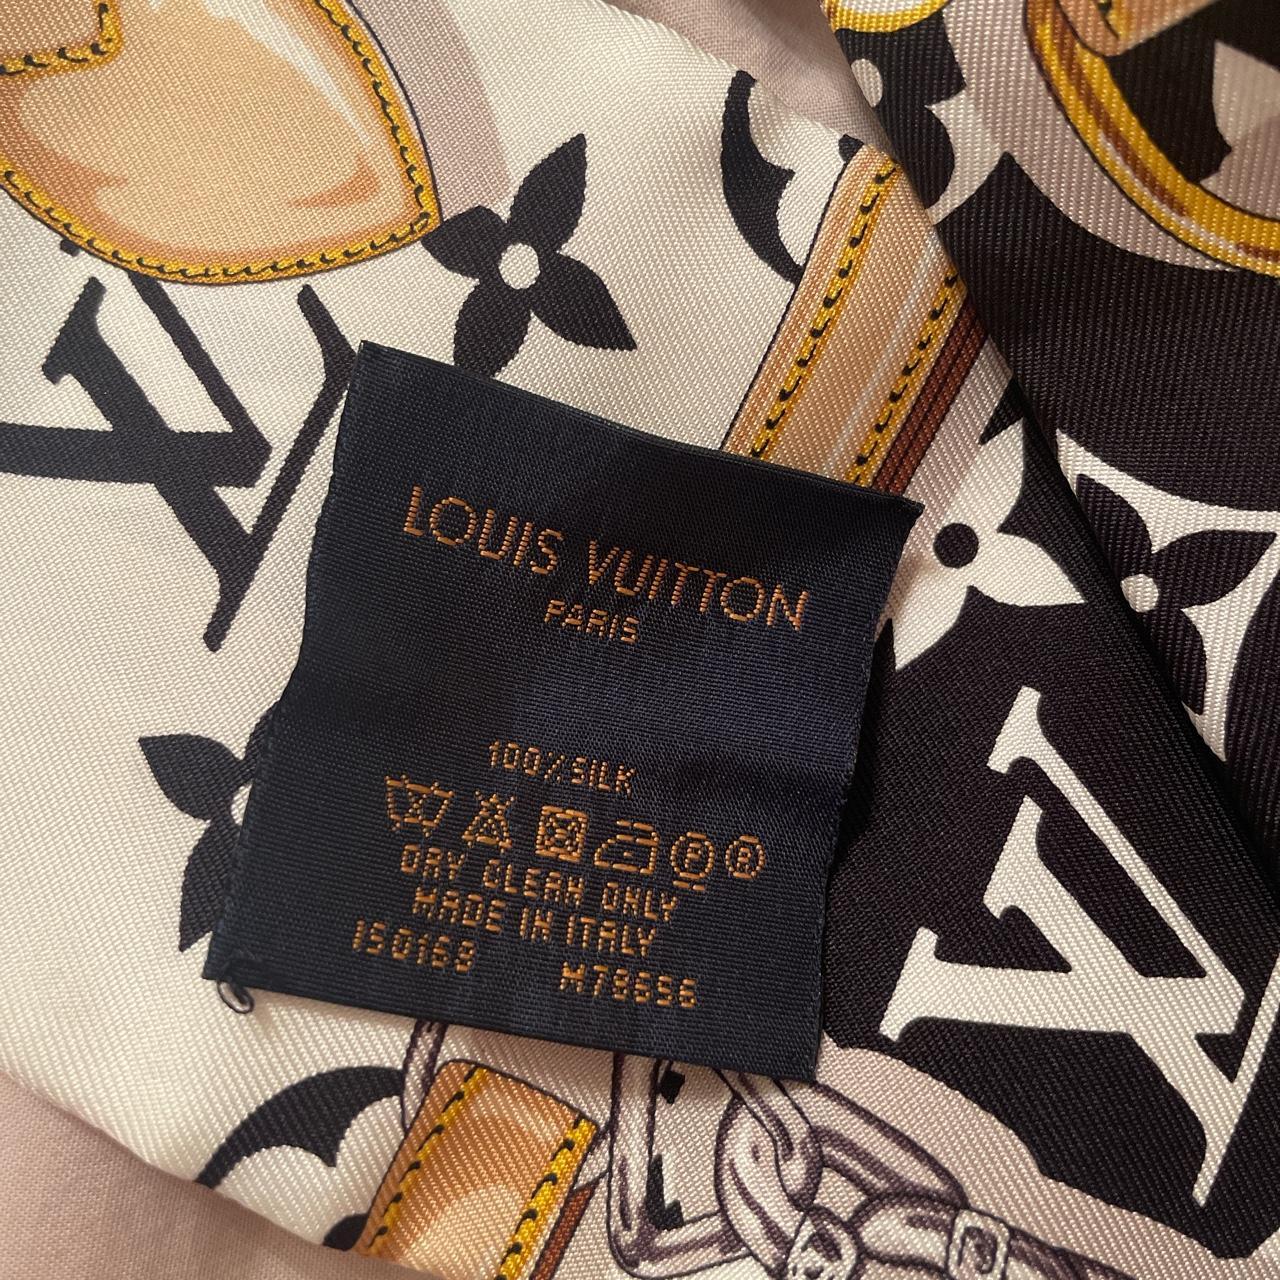 🌈Louis Vuitton Multicolor twilly 🌈 🌈Bought from - Depop